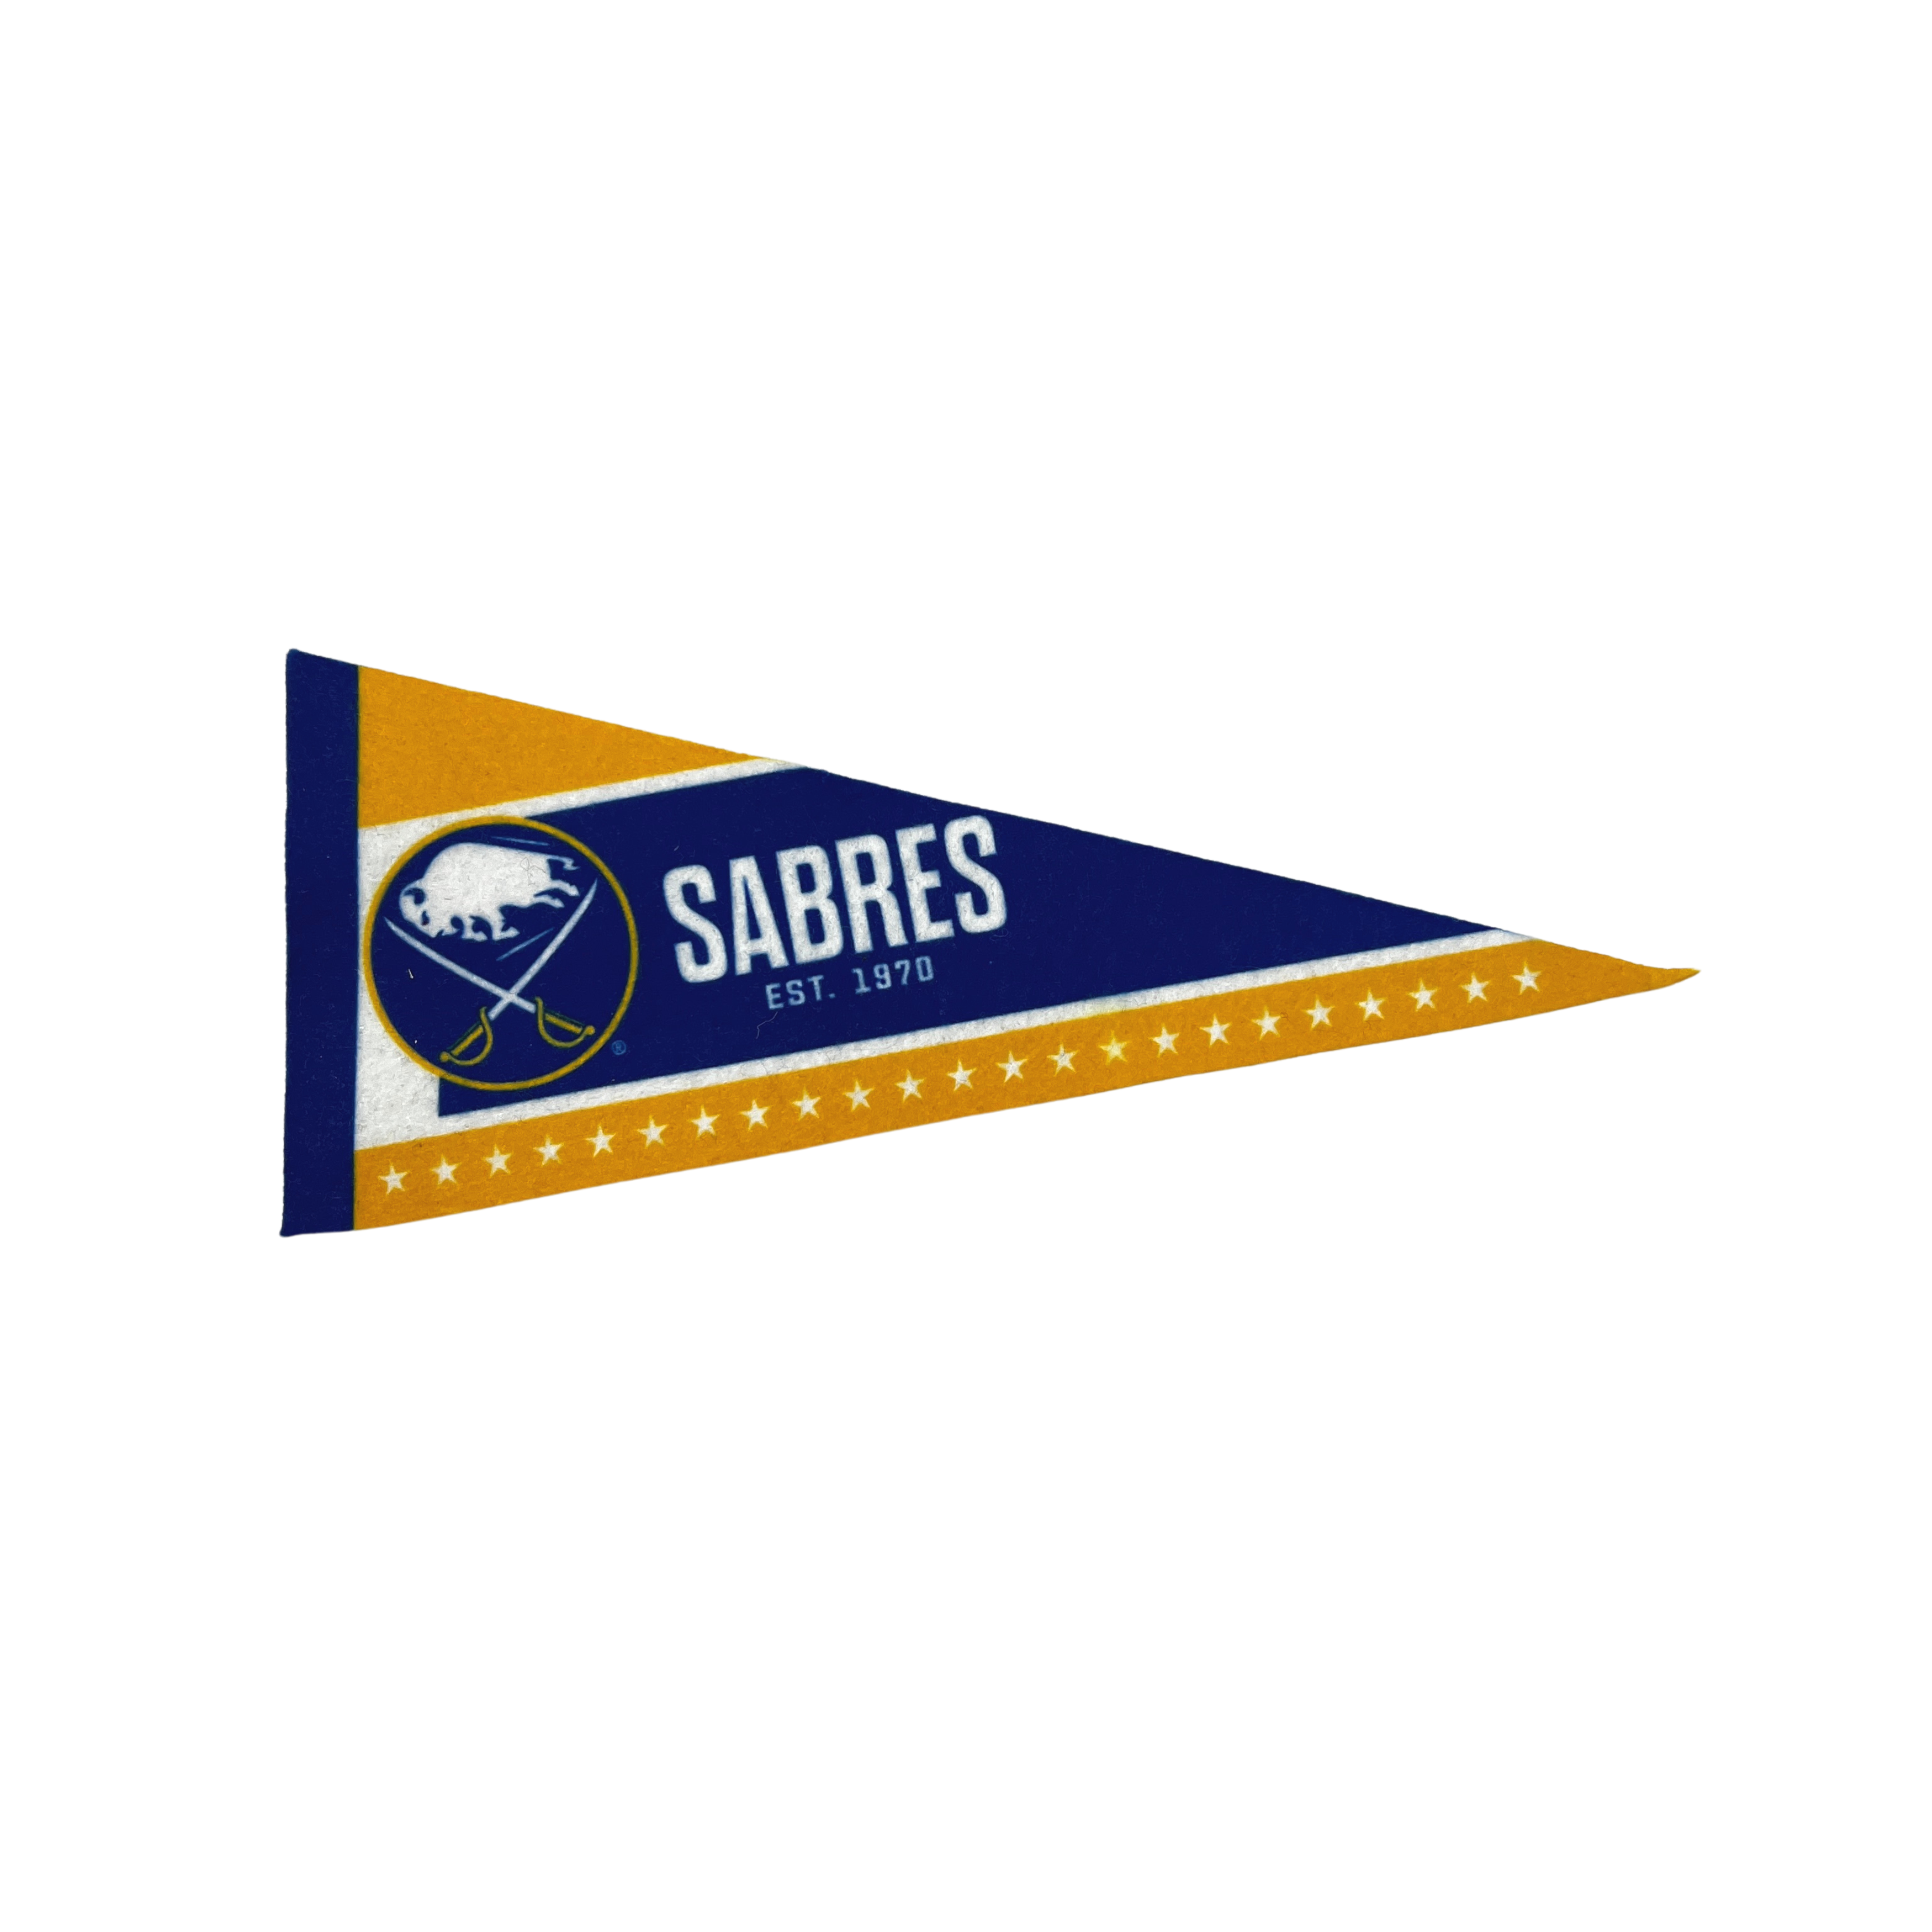 Officially Licensed NHL Personalized Soft Felt Pennant - Sabres